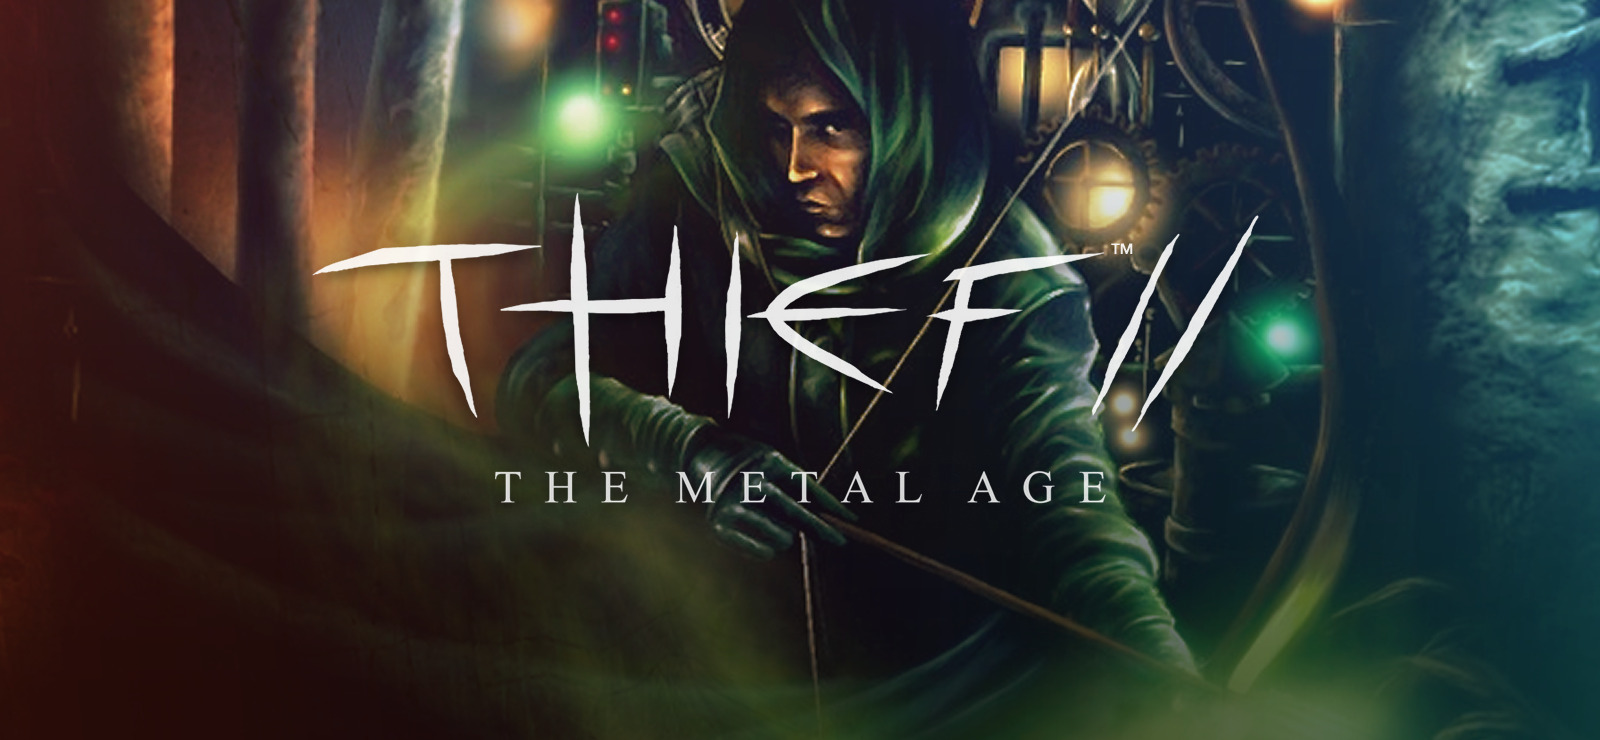 Download Thief 2 The Metal Age v1.26.ND-GOG